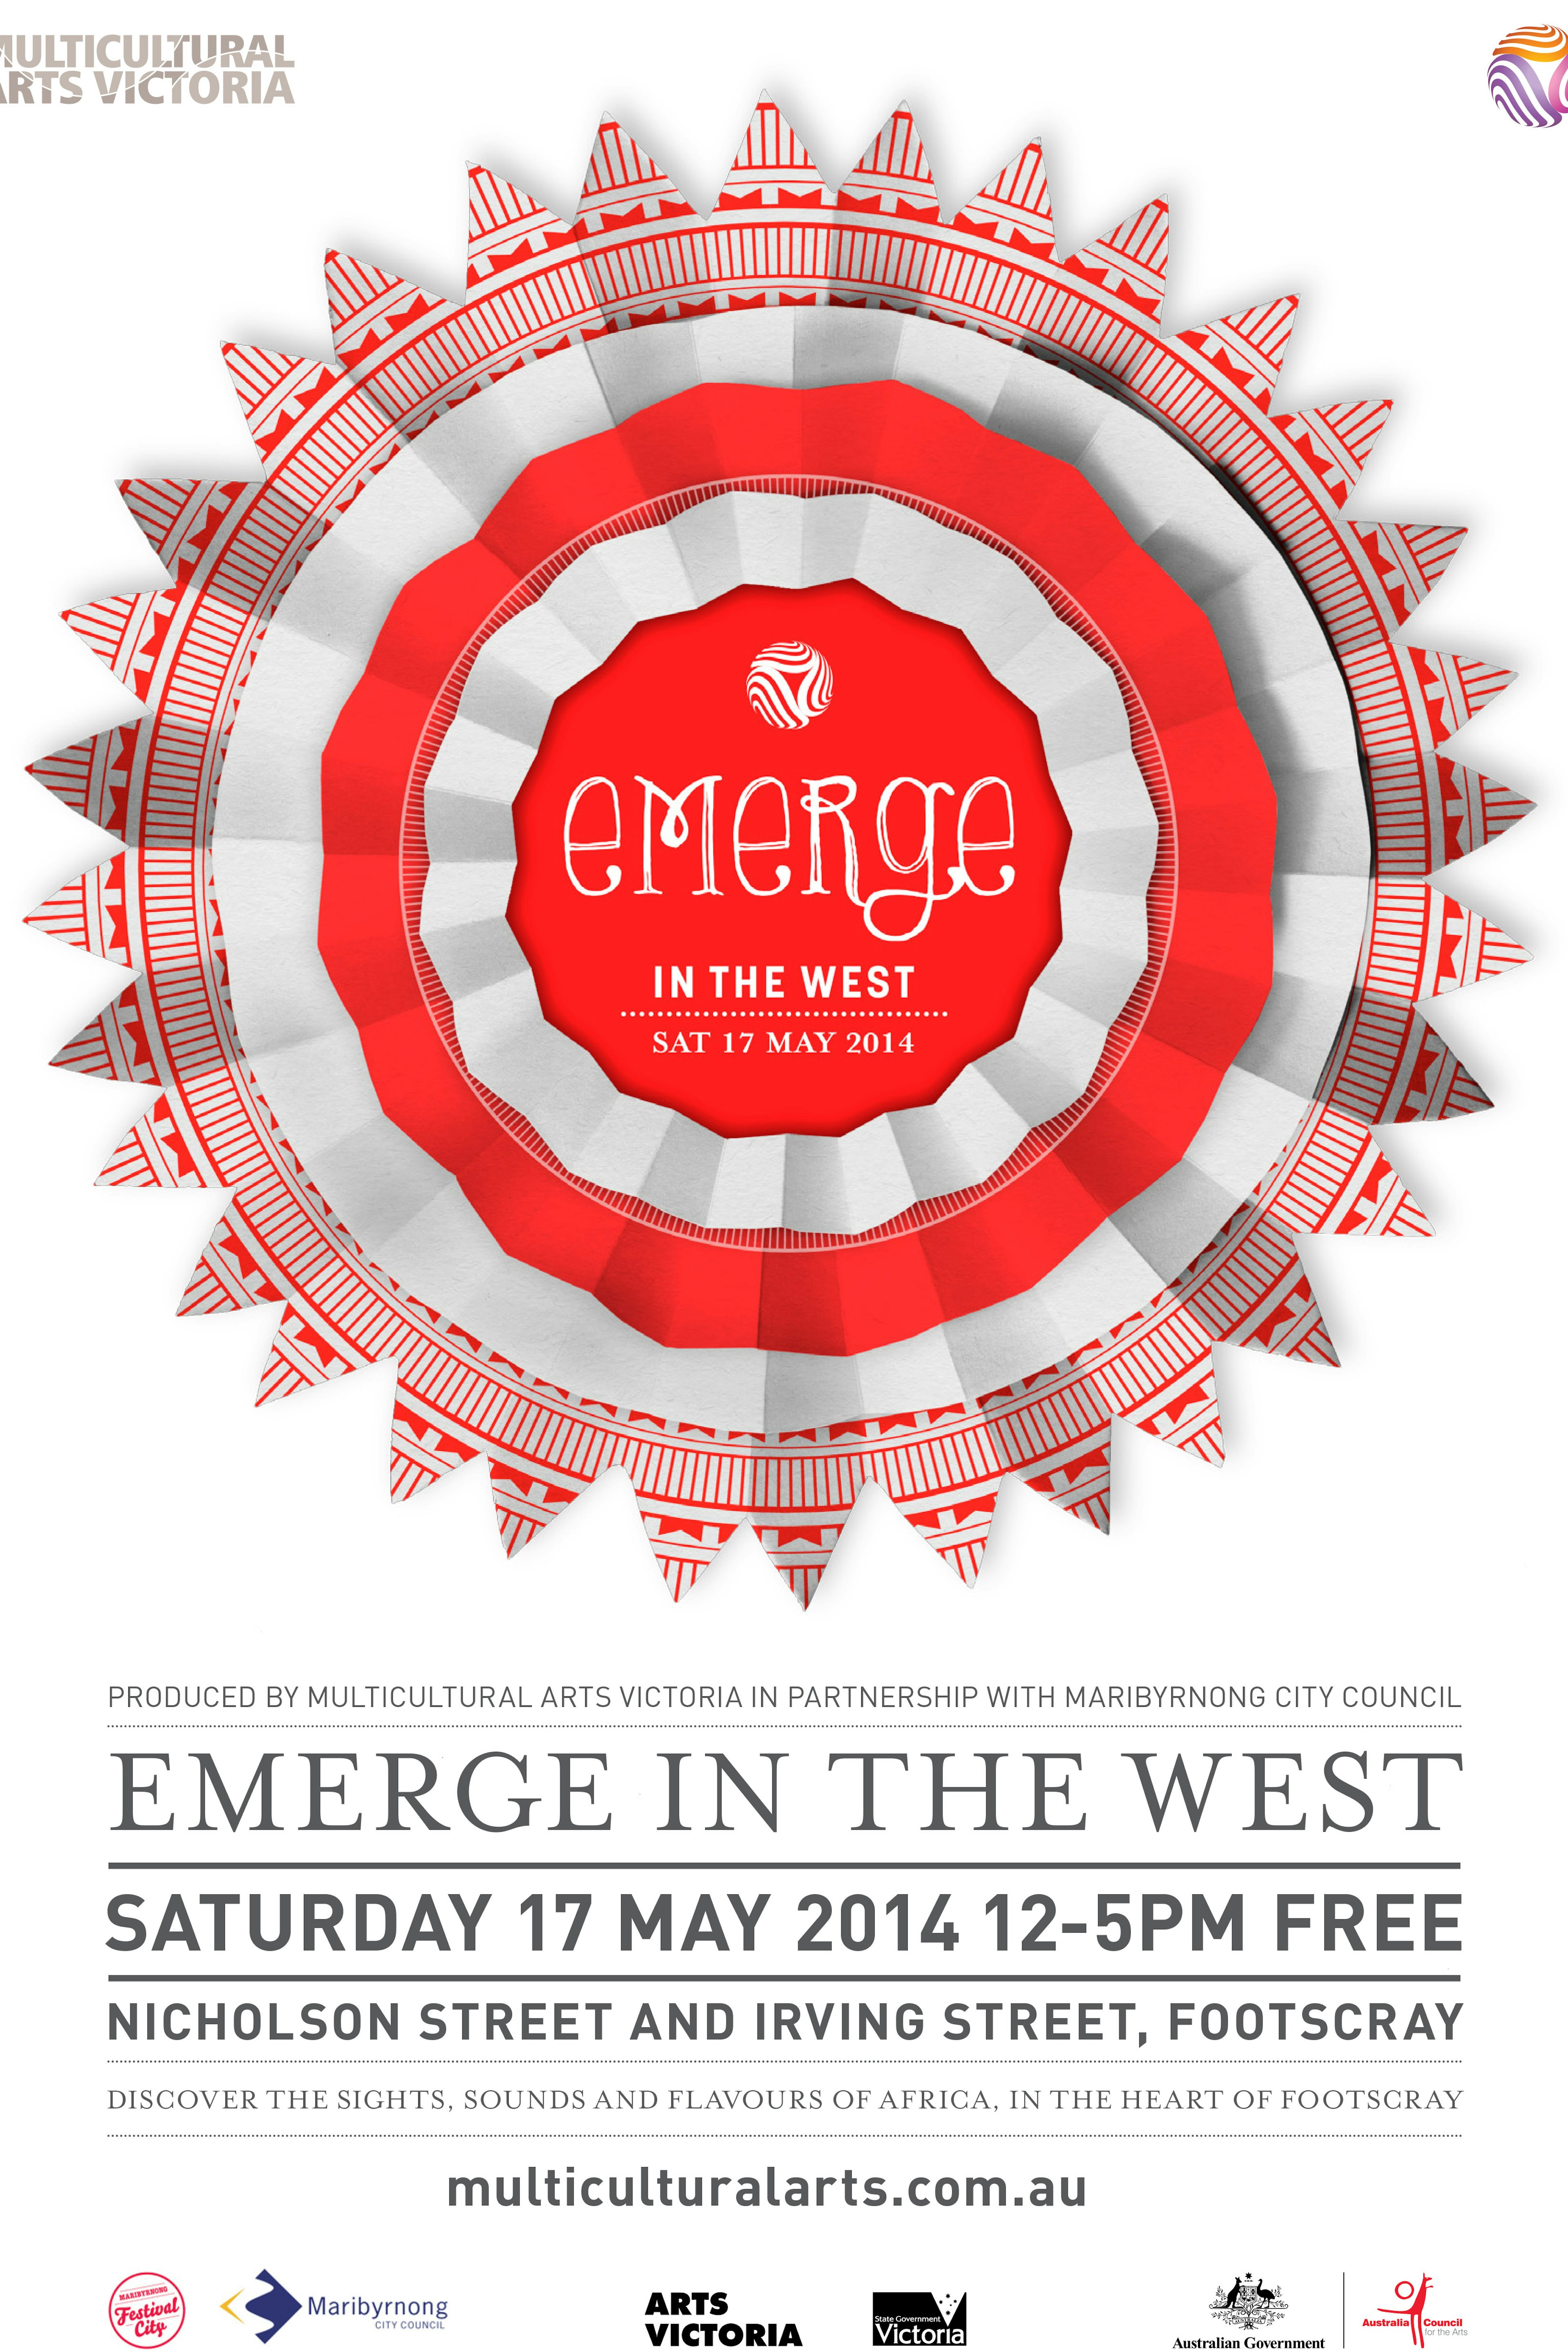 MULTICULTURAL ARTS VICTORIA: Emerge in the west Exhibition